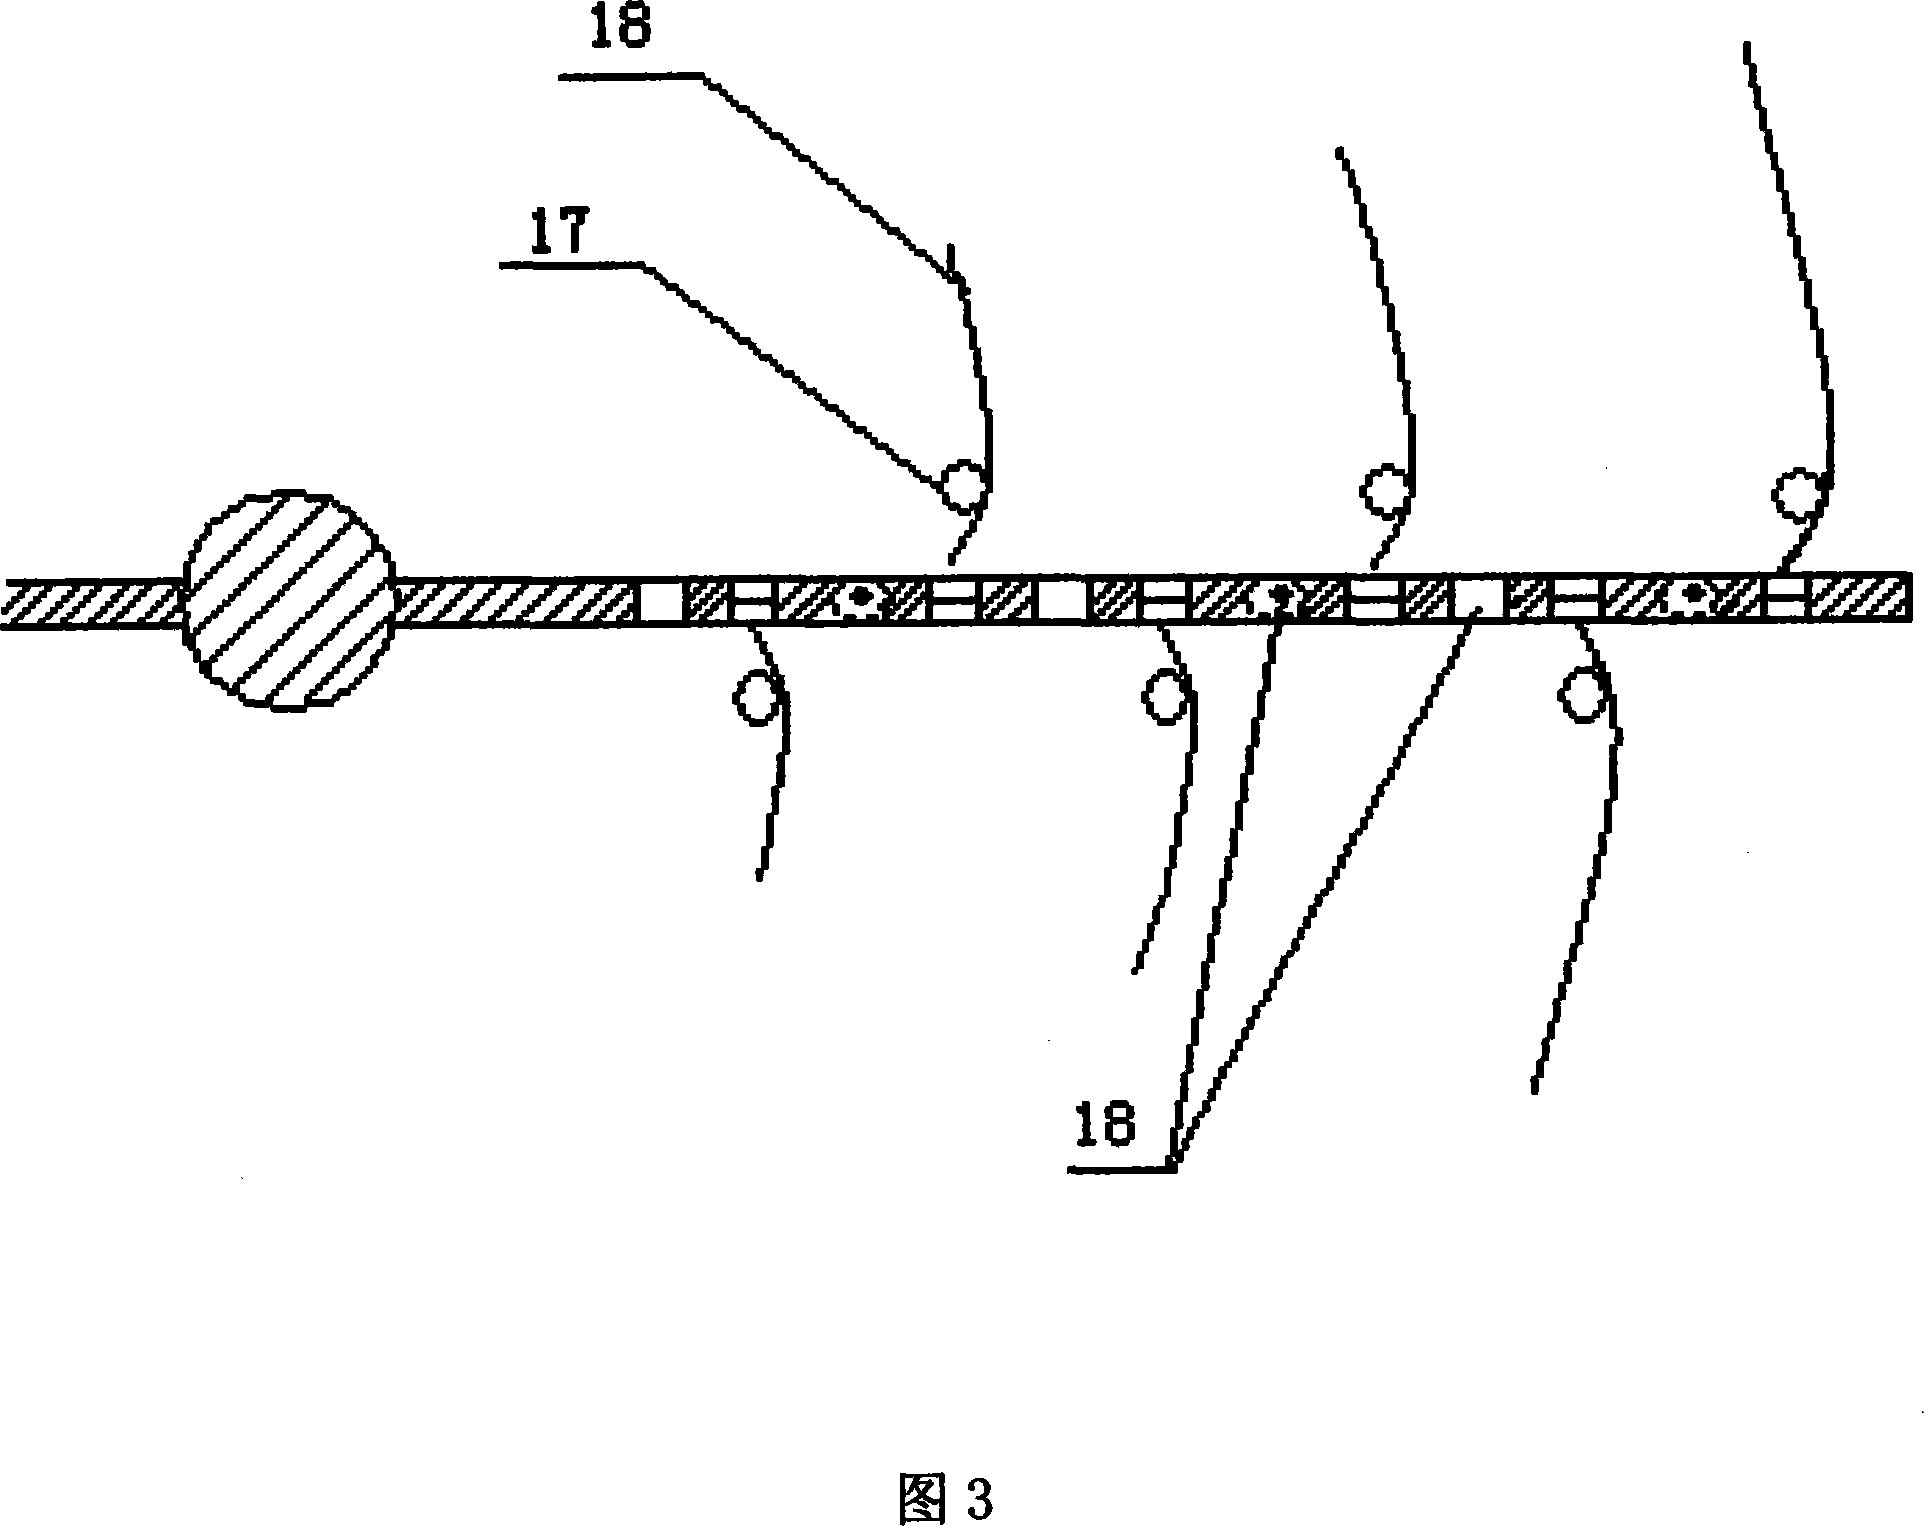 Conical helical wave energy and ocean current energy universal electricity generating device